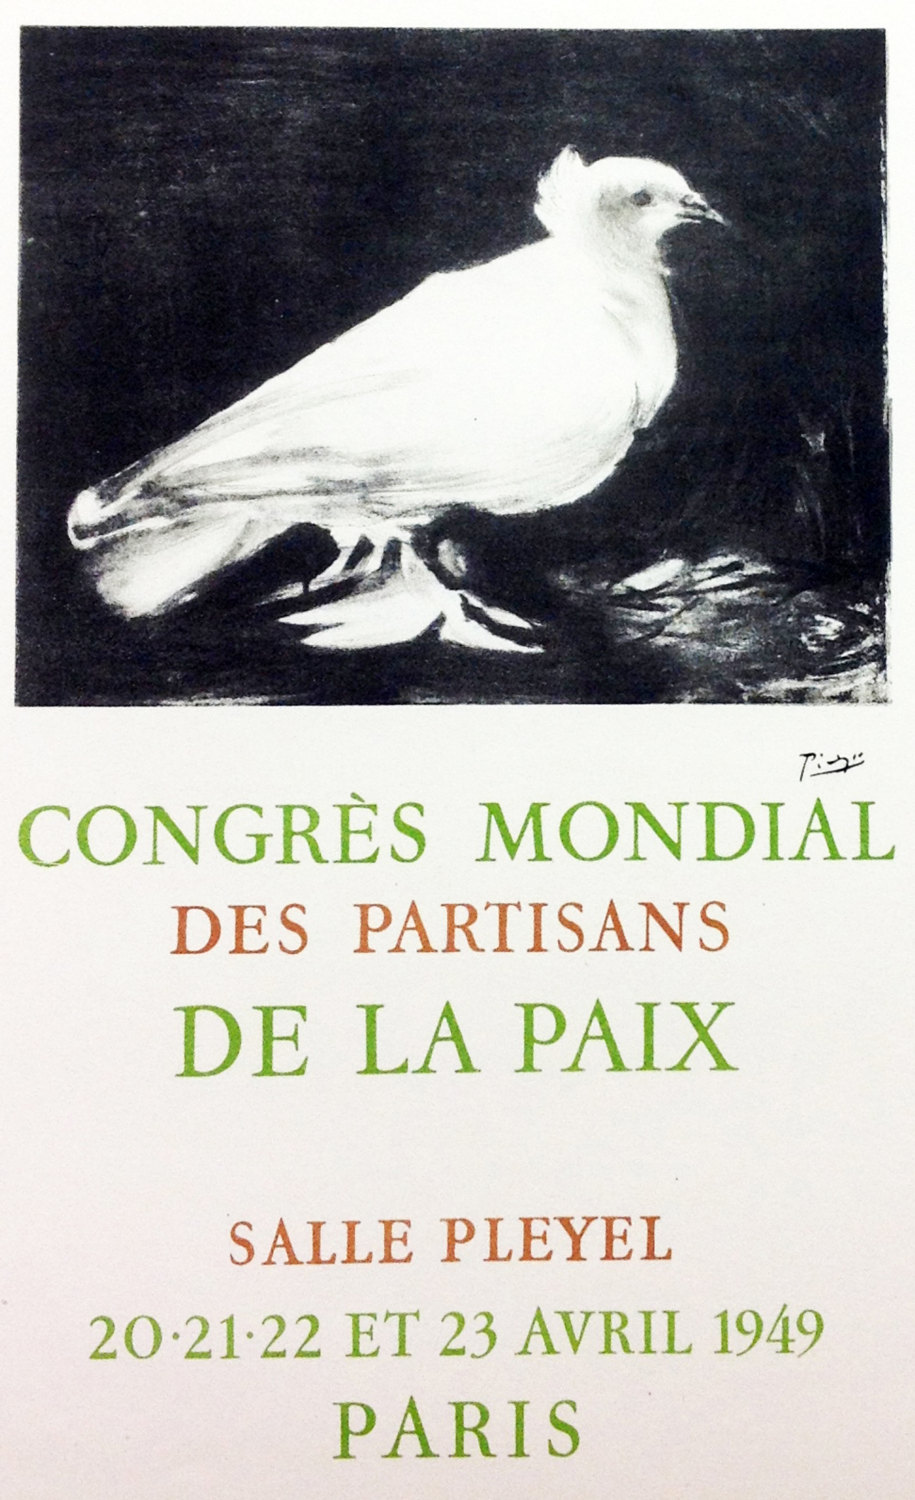 Picasso Lithograph 60, Congress mondial, Art in posters